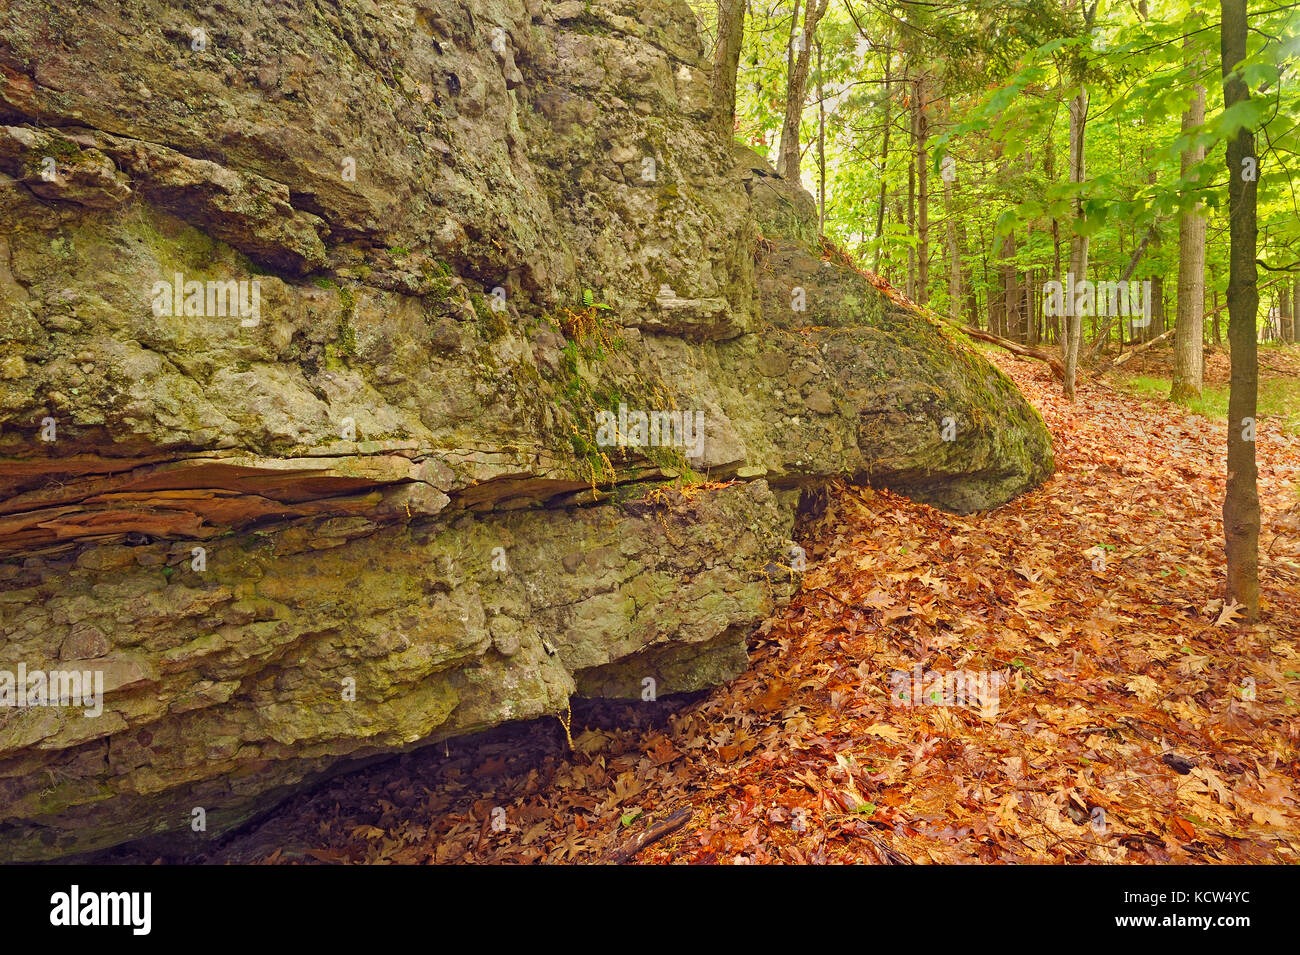 Rock and leaves, Thousand Islands National Park, Ontario, Canada Stock Photo